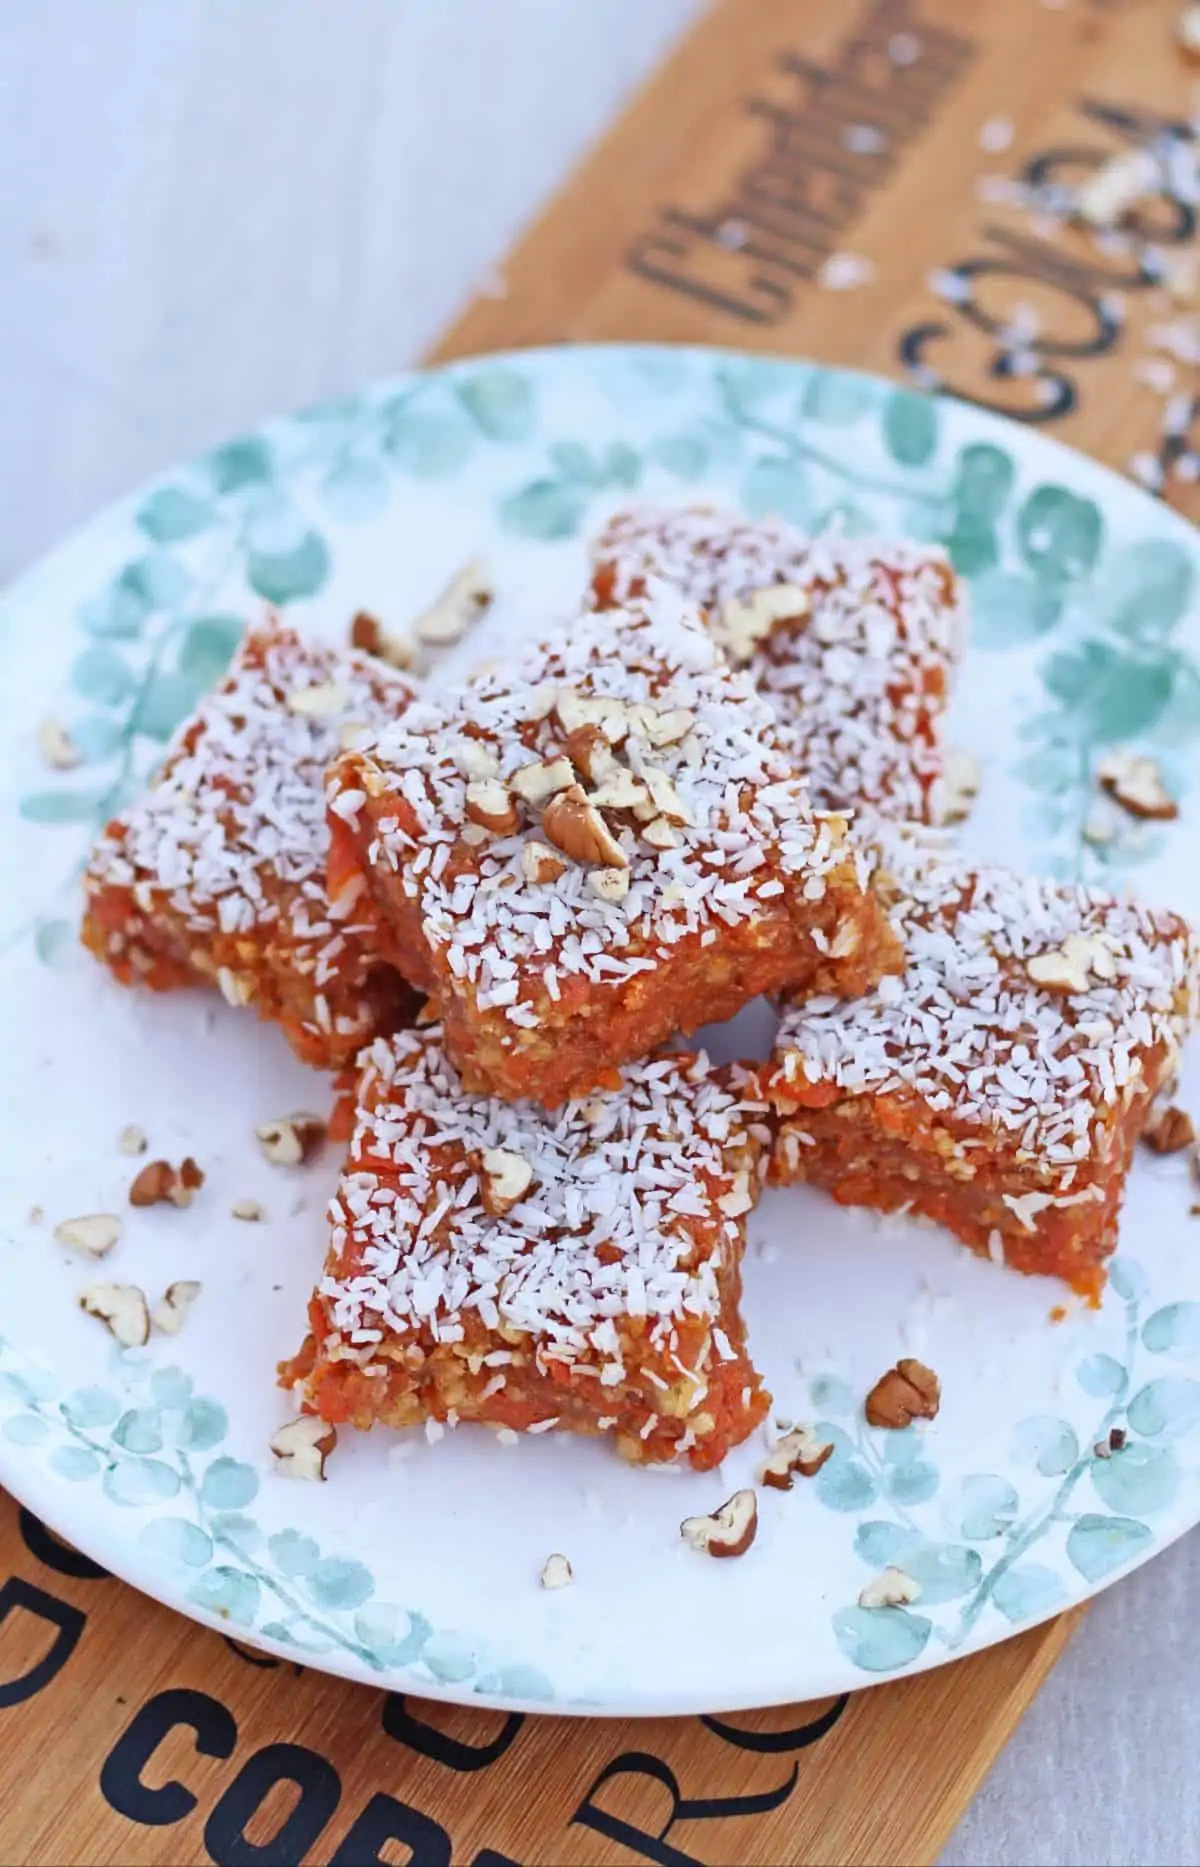 Cezerye - Turkish carrot and walnut bars - on a decorated plate.